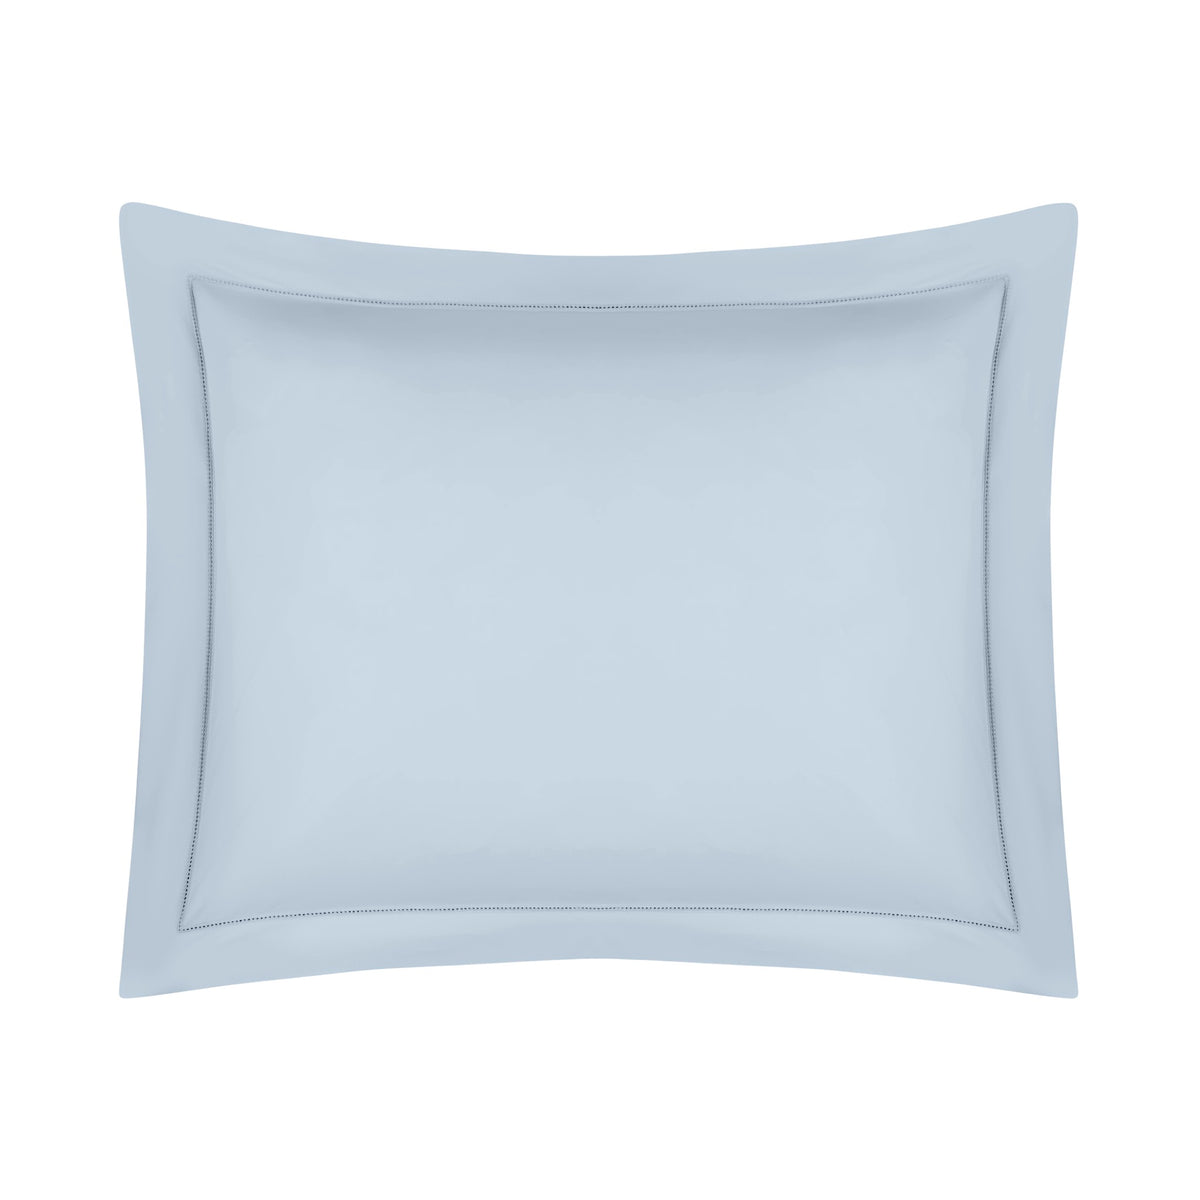 Sham of Home Treasures Perla Percale Bedding in Frost Blue Color